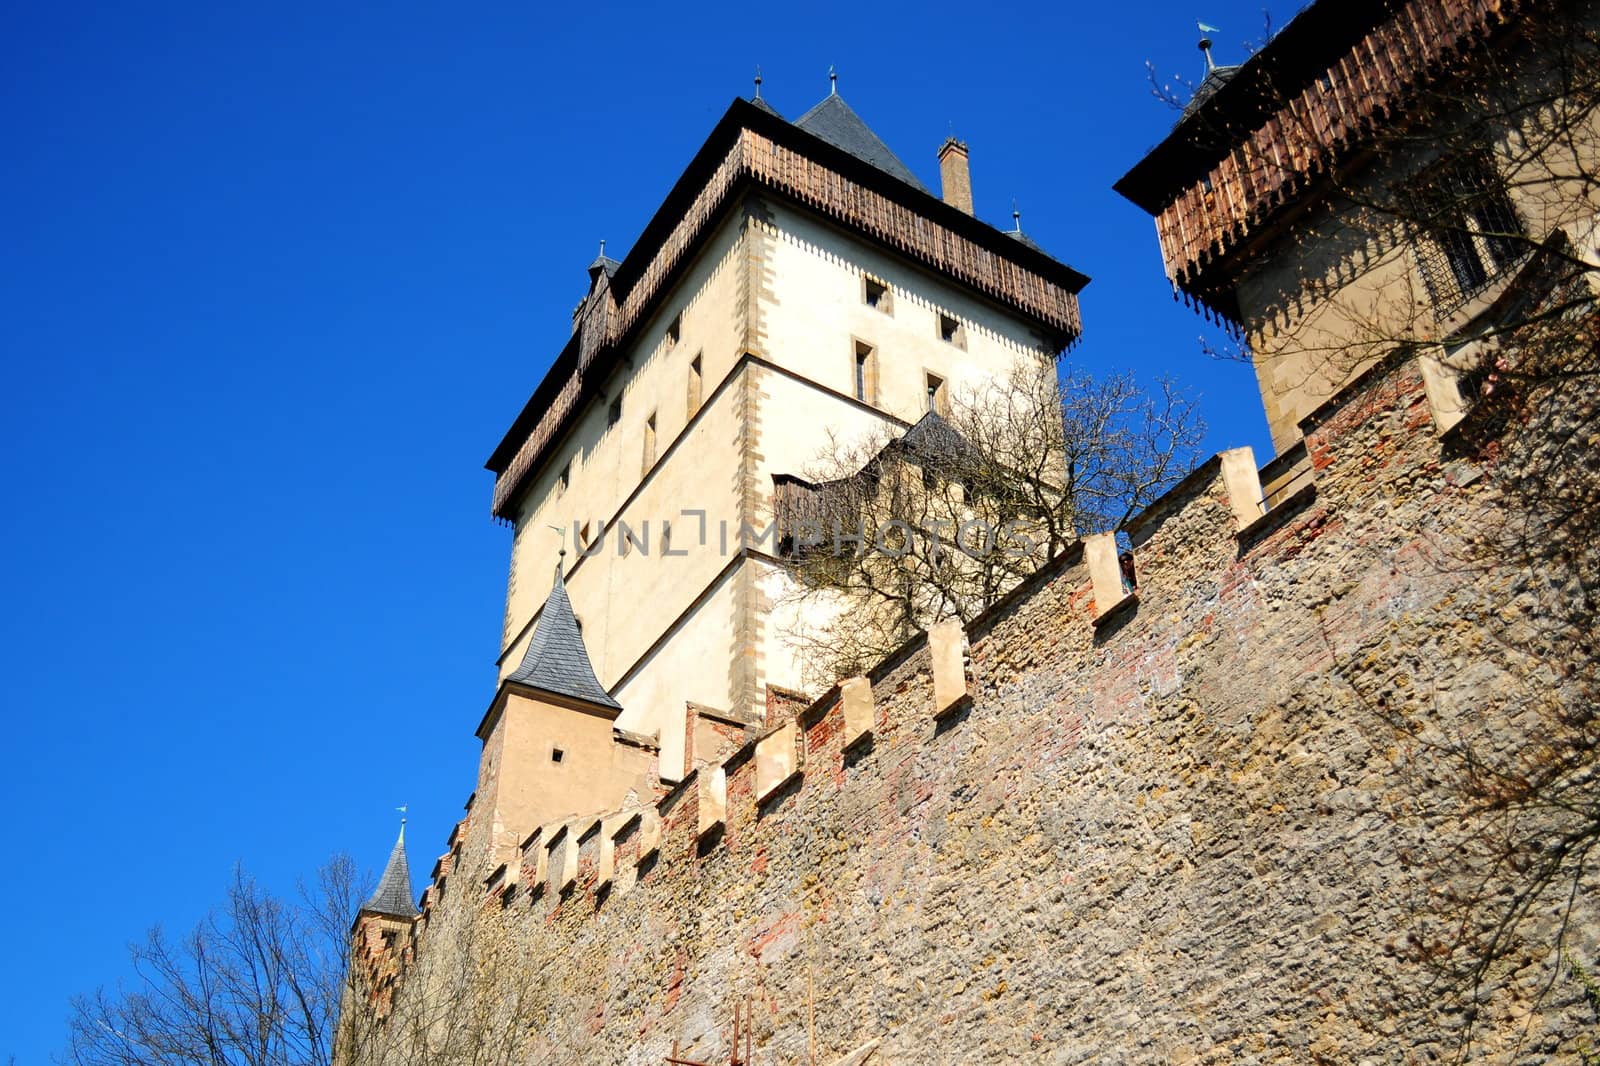 Part of Karlstejn Castle over blue sky during the summer day